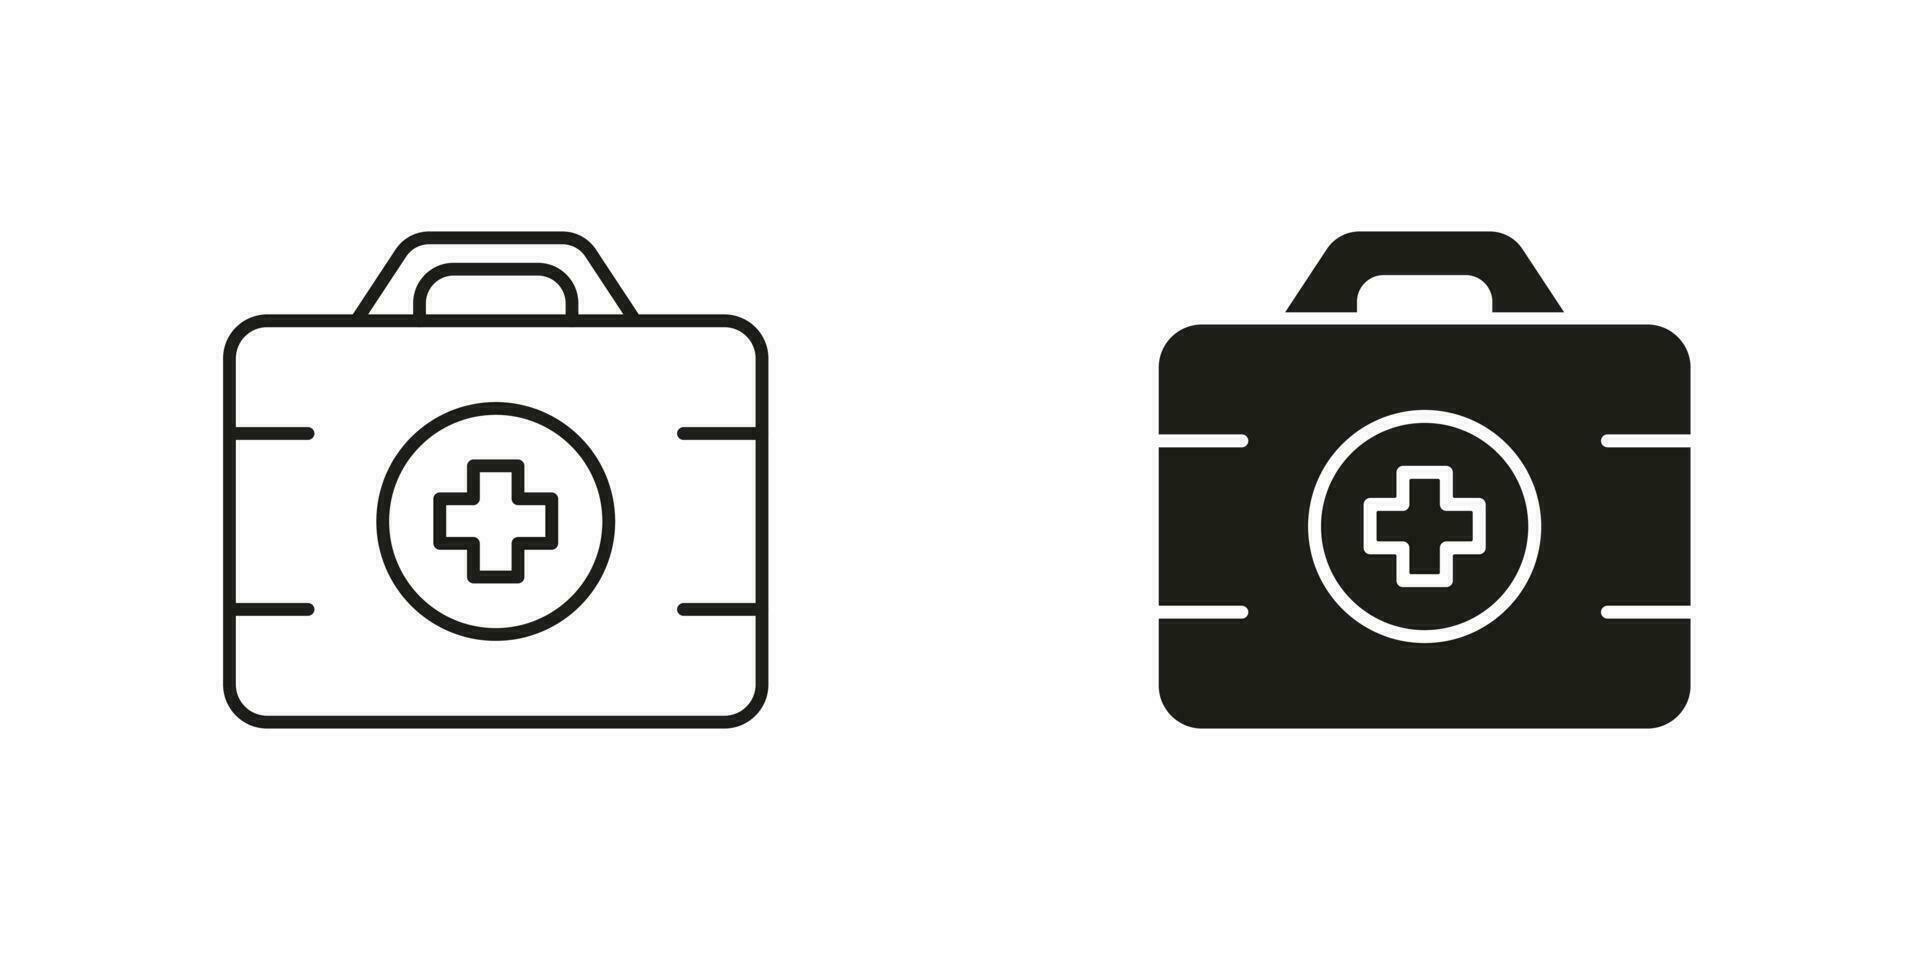 First Aid Kit Line and Silhouette Black Icon Set. Medicine Tools Box Sign. Medication Help Suitcase Symbol Collection. Doctor's Medical Emergency Case Pictogram. Isolated Vector Illustration.